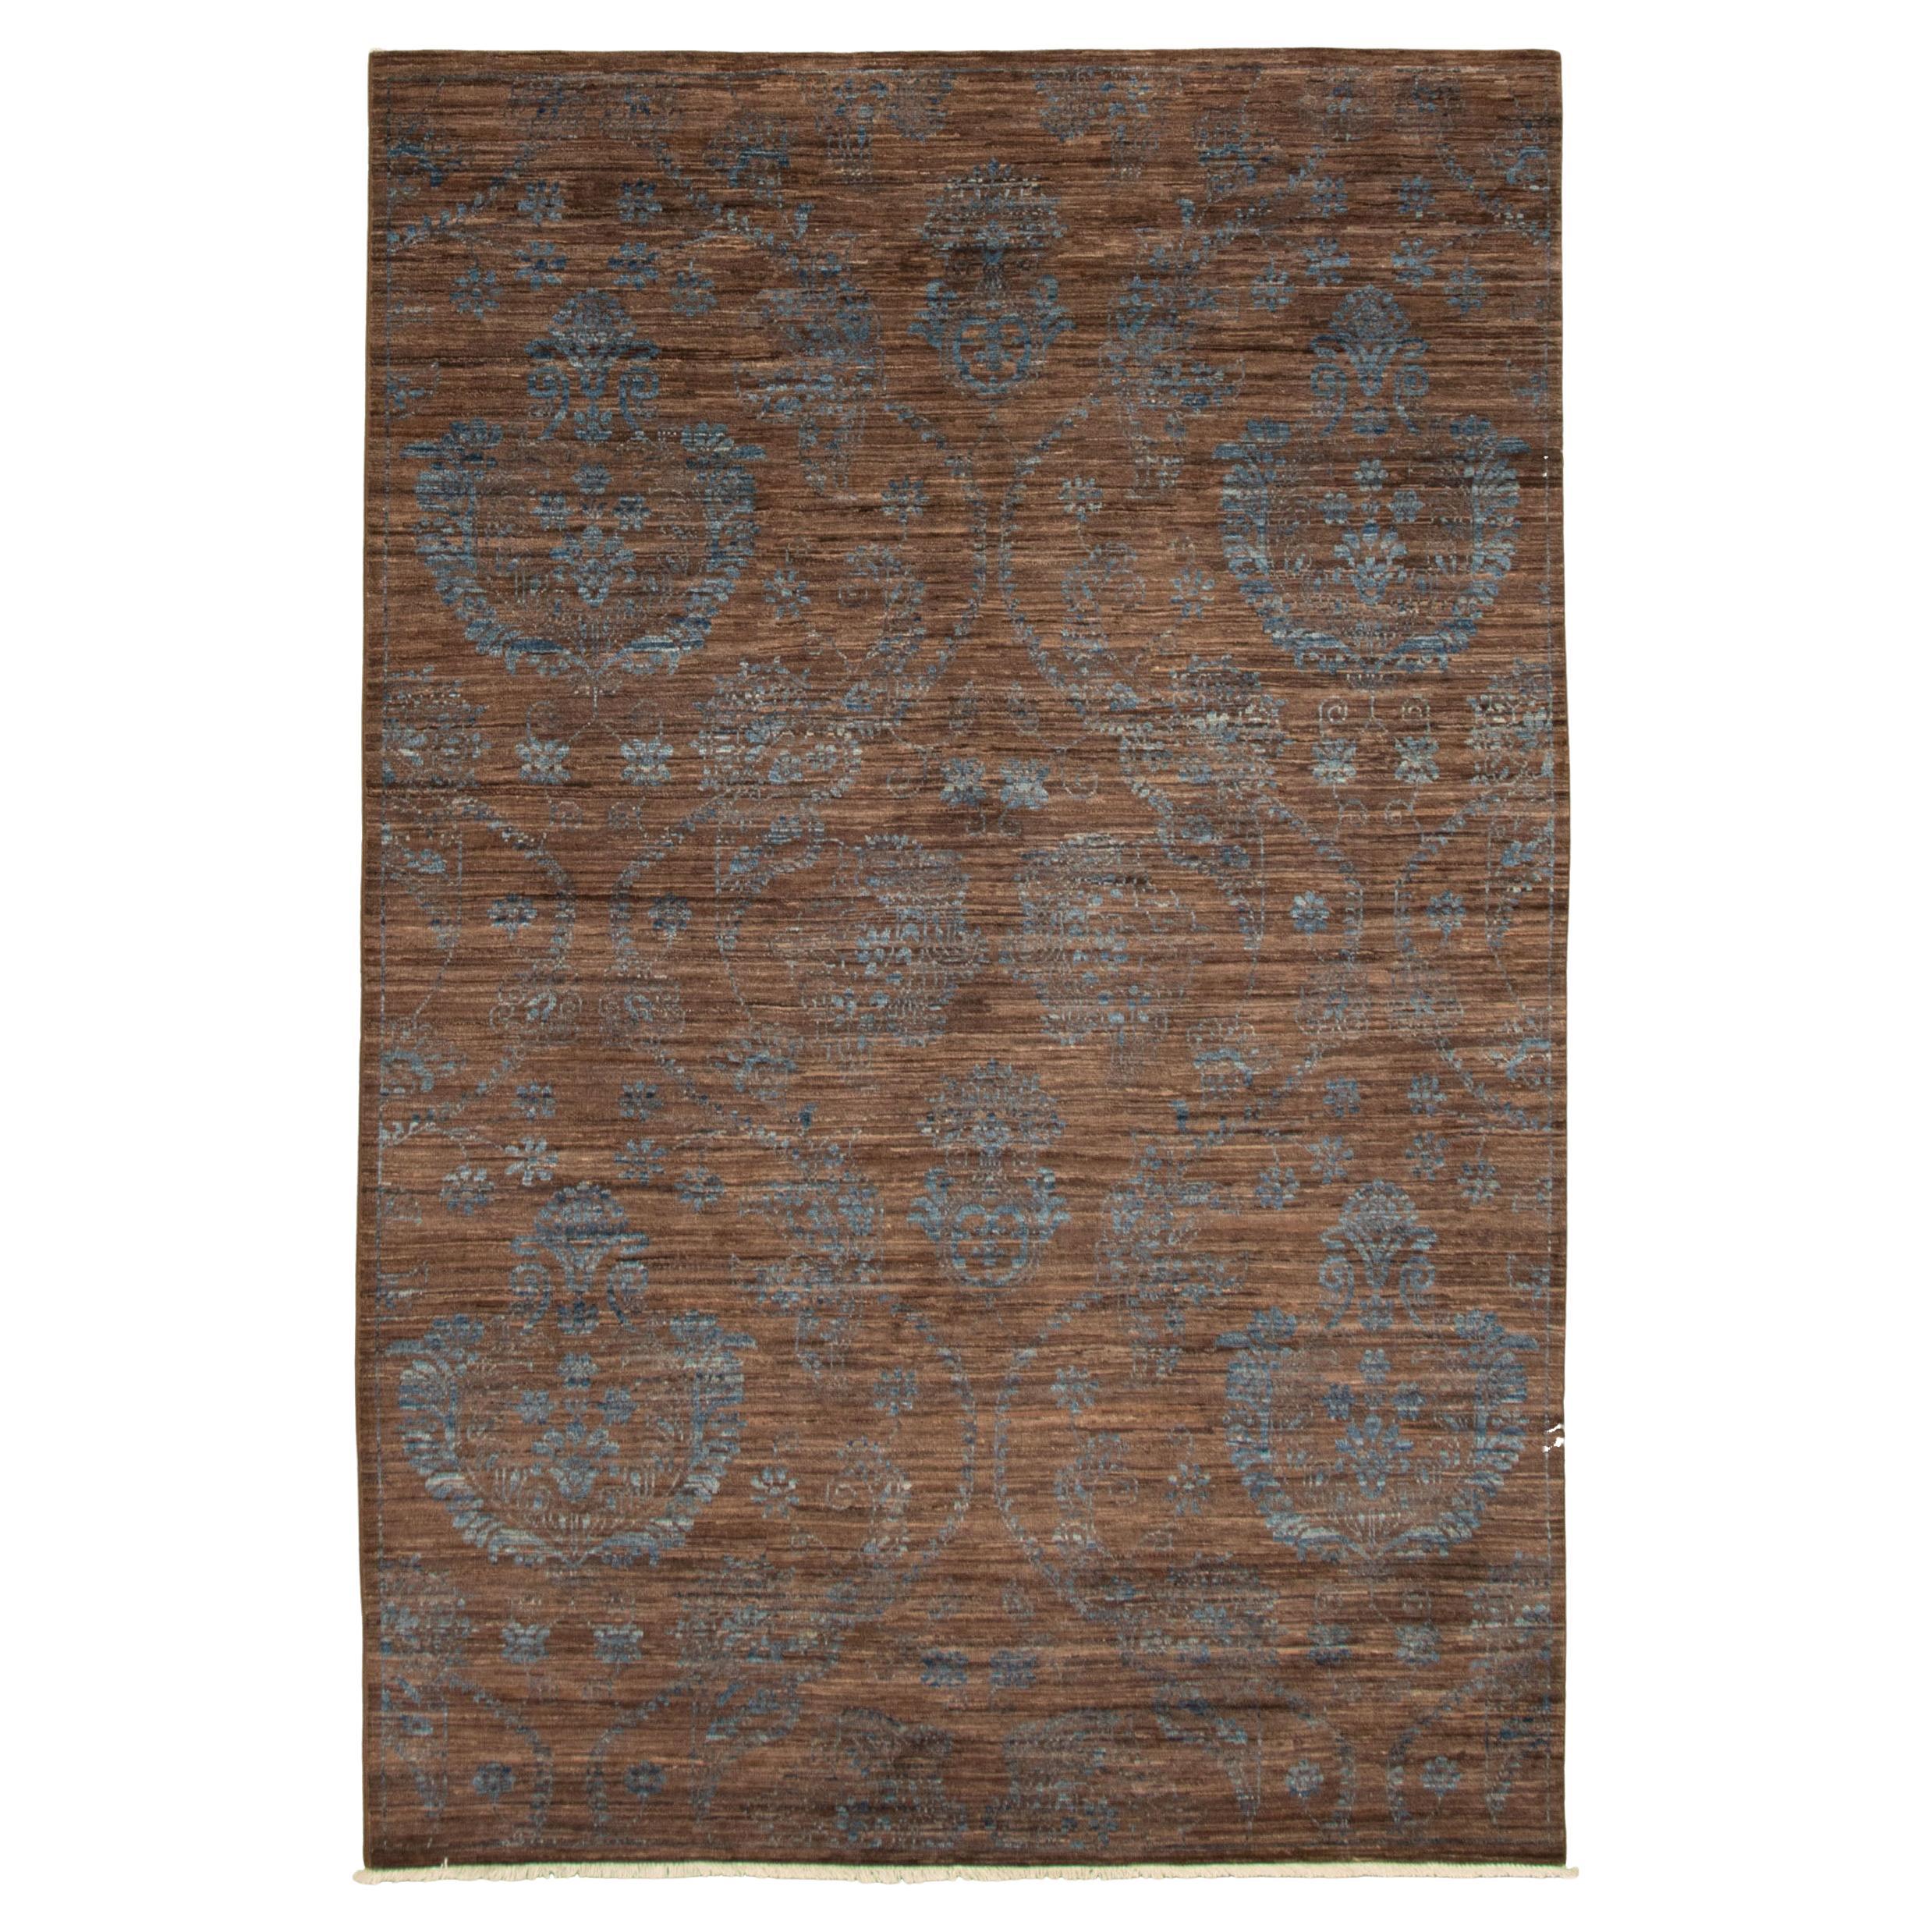 Hand-Knotted Wool Persian Rug, Blue and Brown, 6’ x 9’